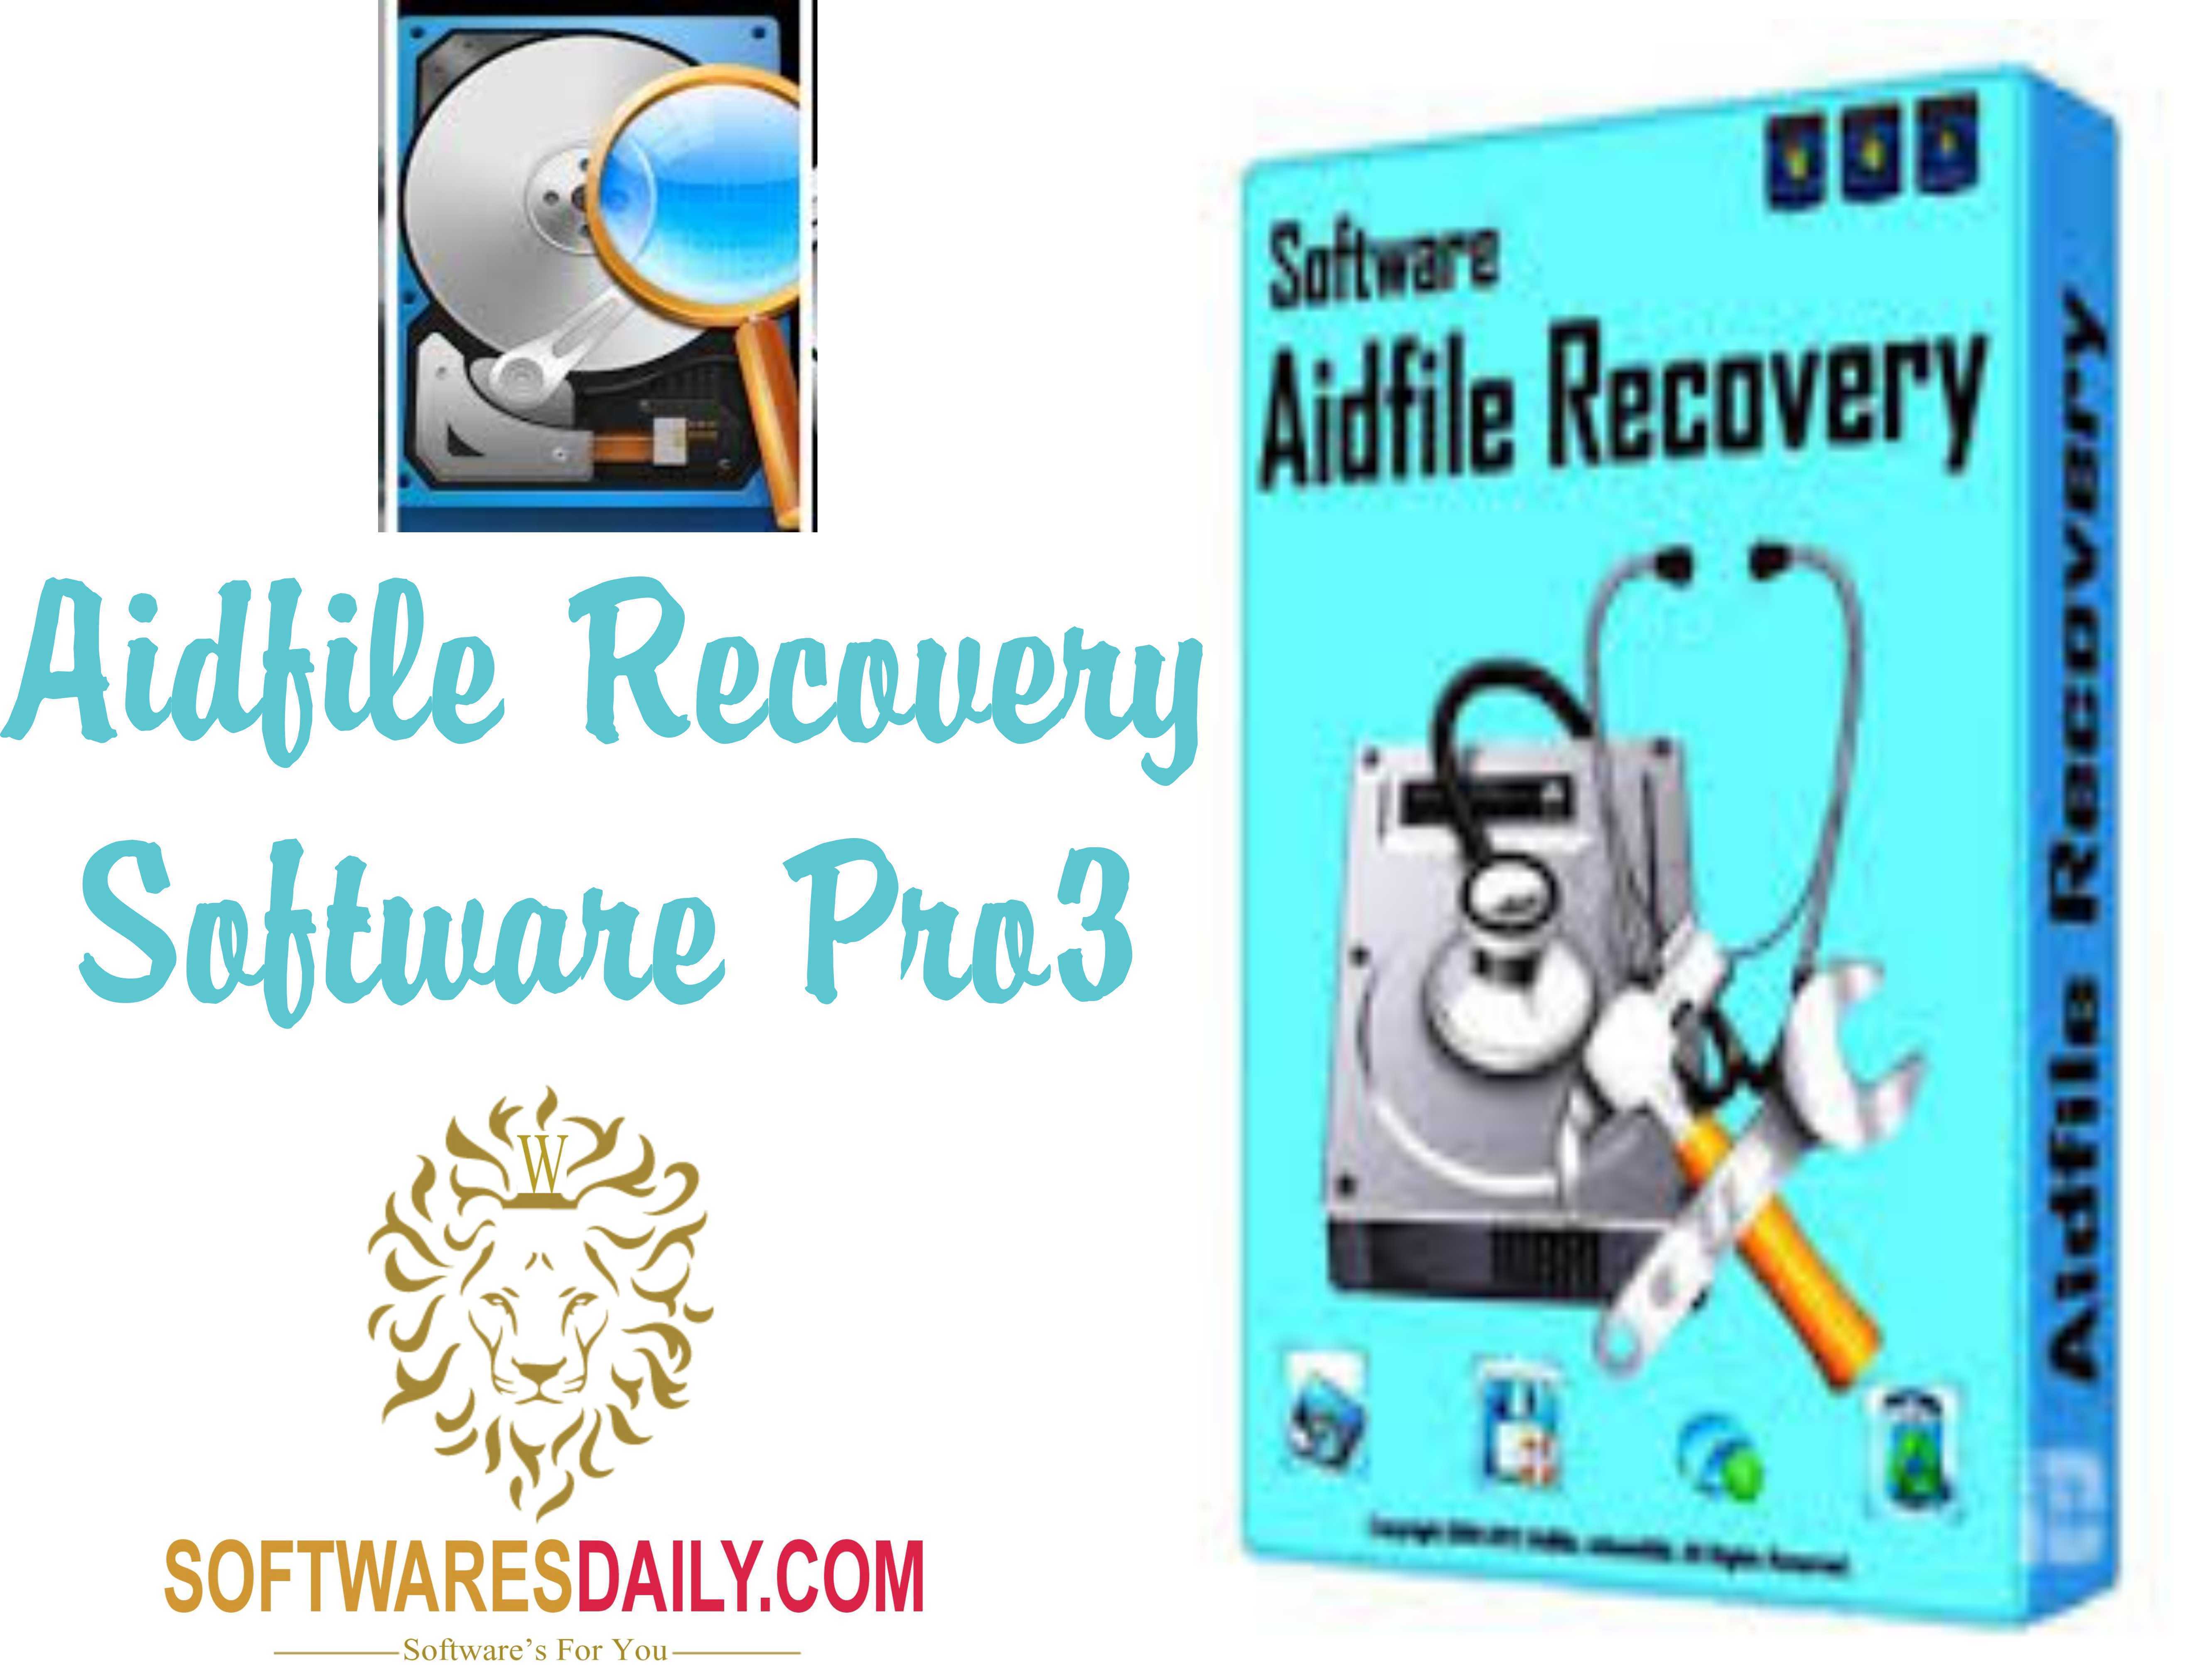 aidfile recovery software register code and username